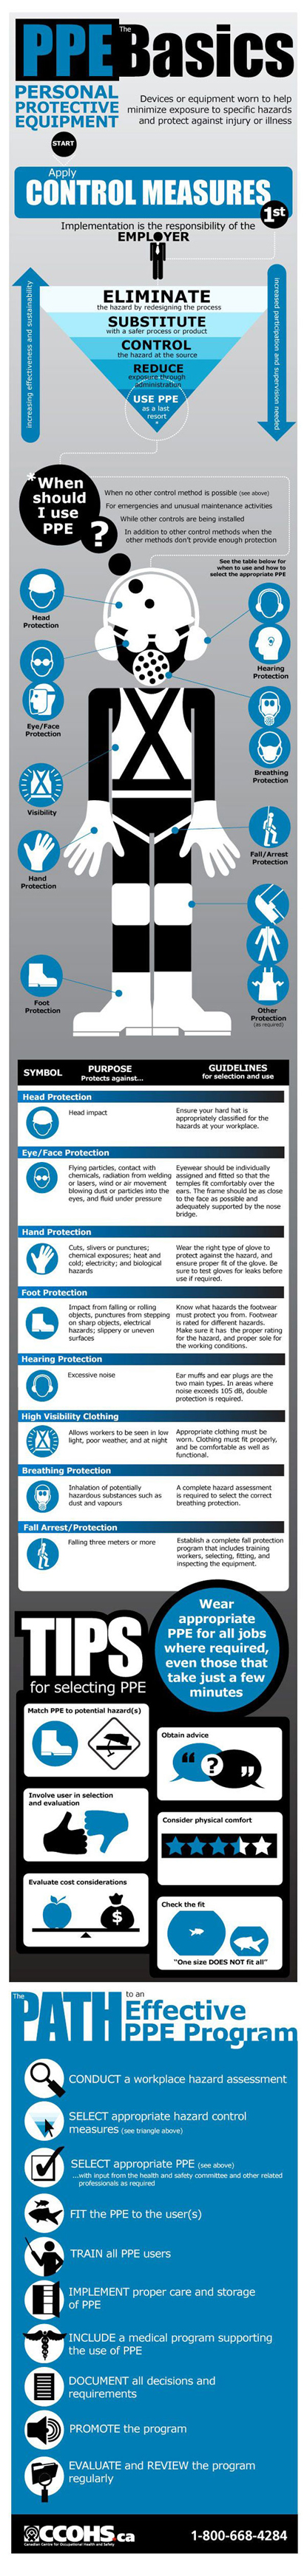 PPE Infographic: PPE - The Basics